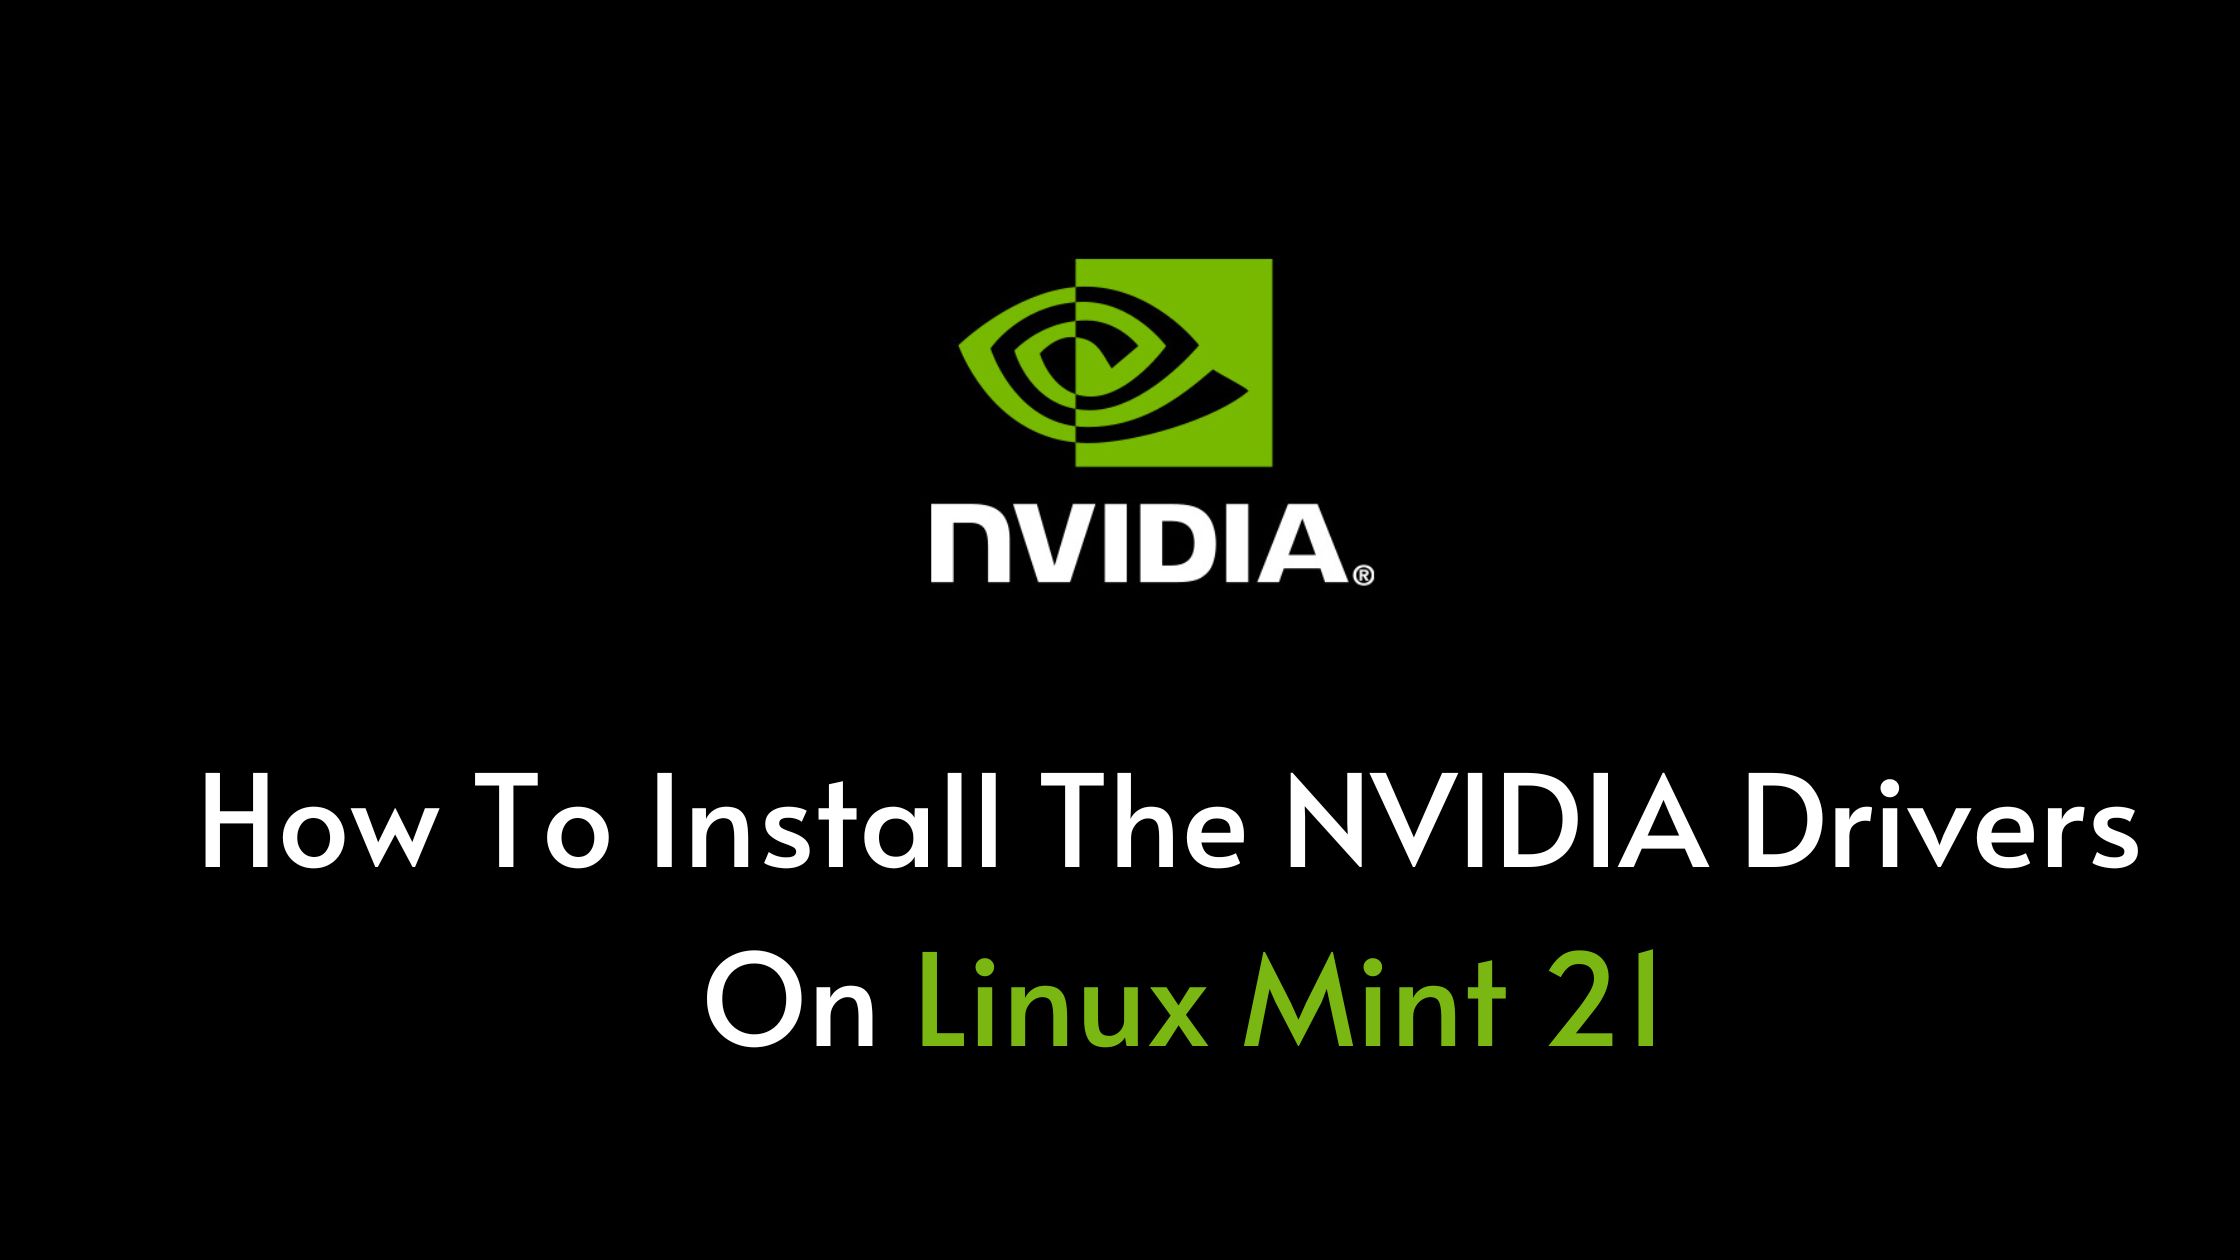 How To Install The NVIDIA Drivers On Linux Mint 21